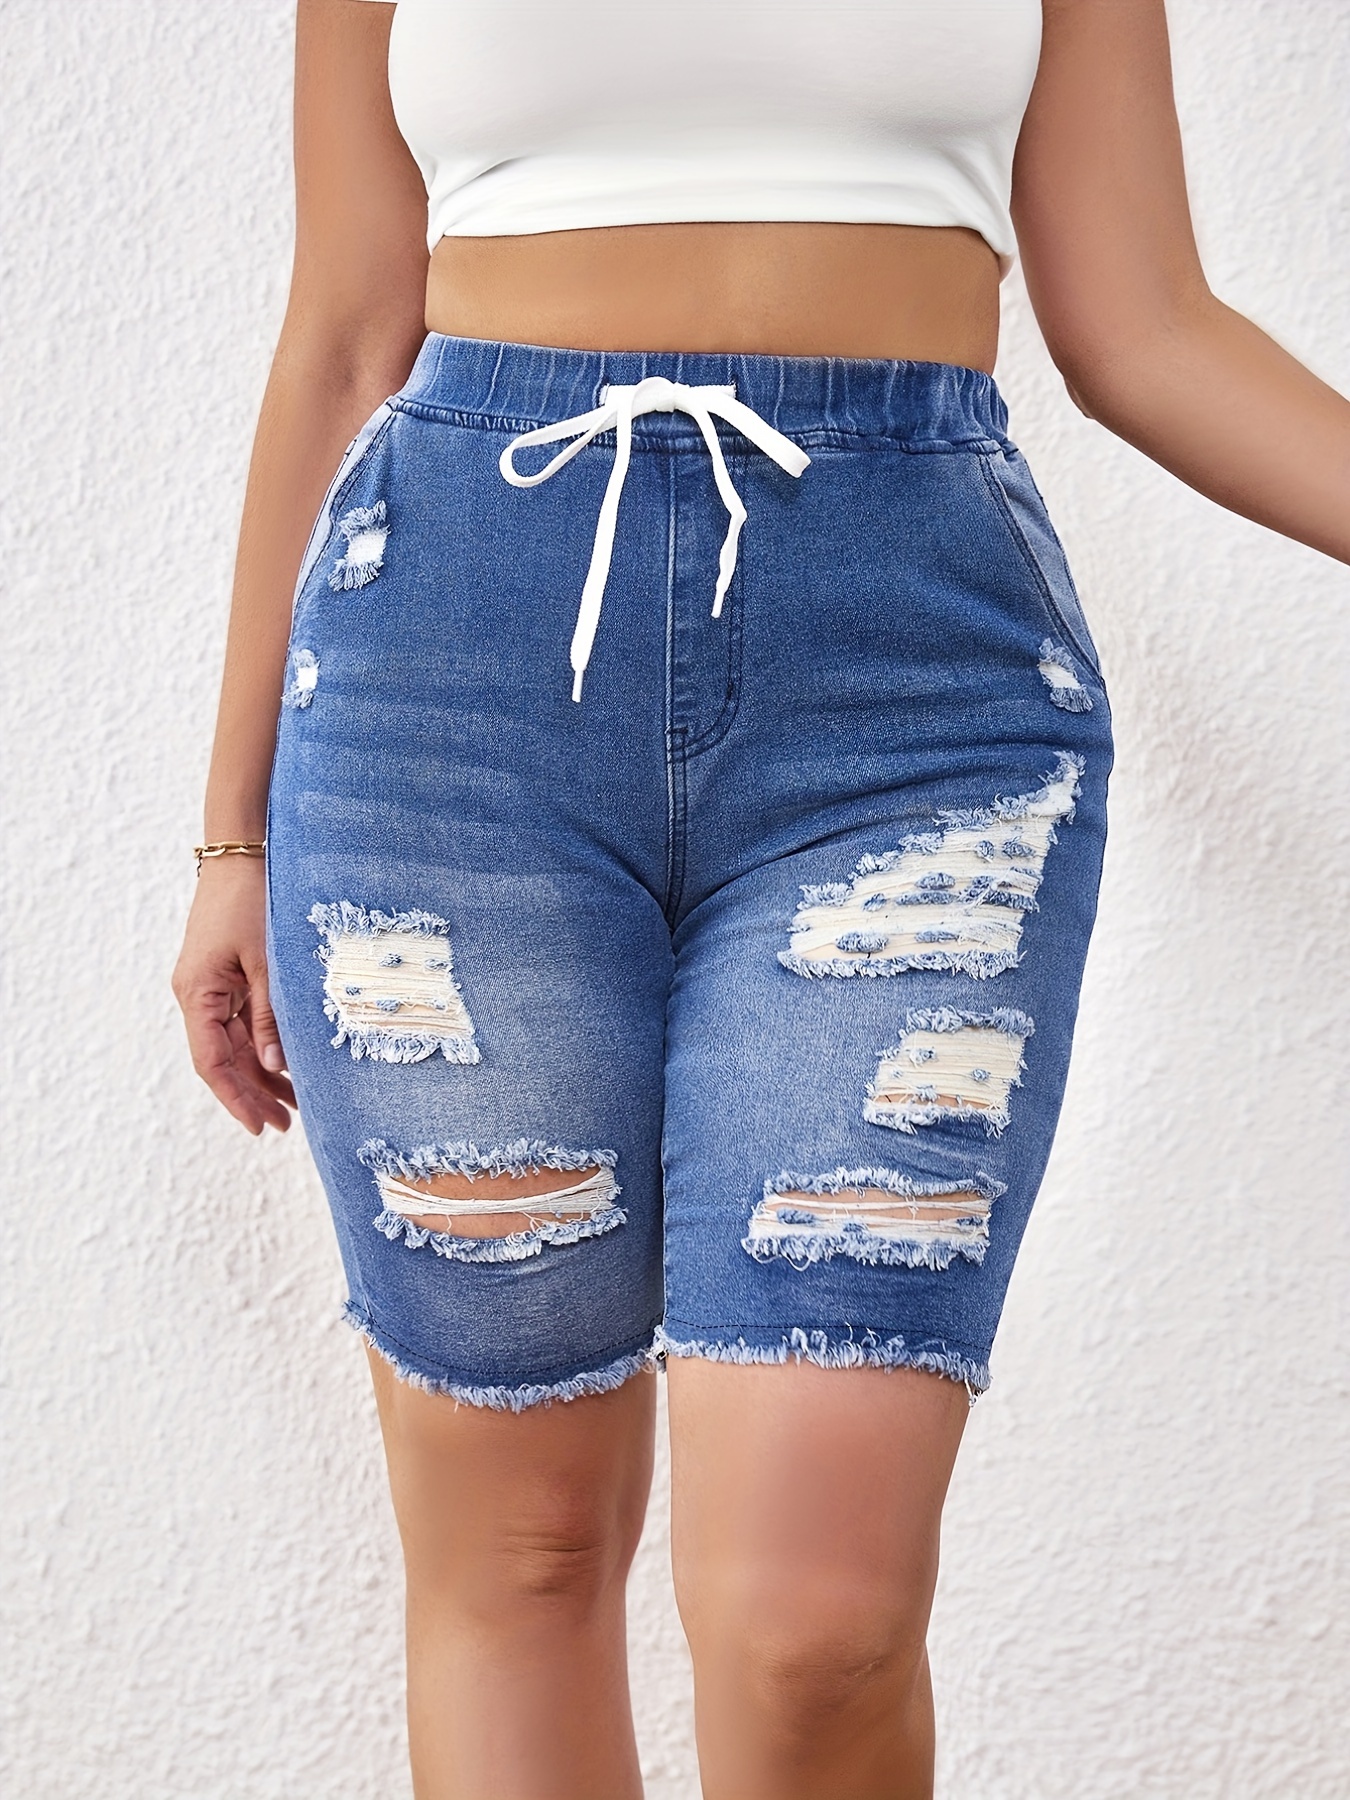 Buy DISOLVE Women Plus Size Casual Denim Shorts High Waisted